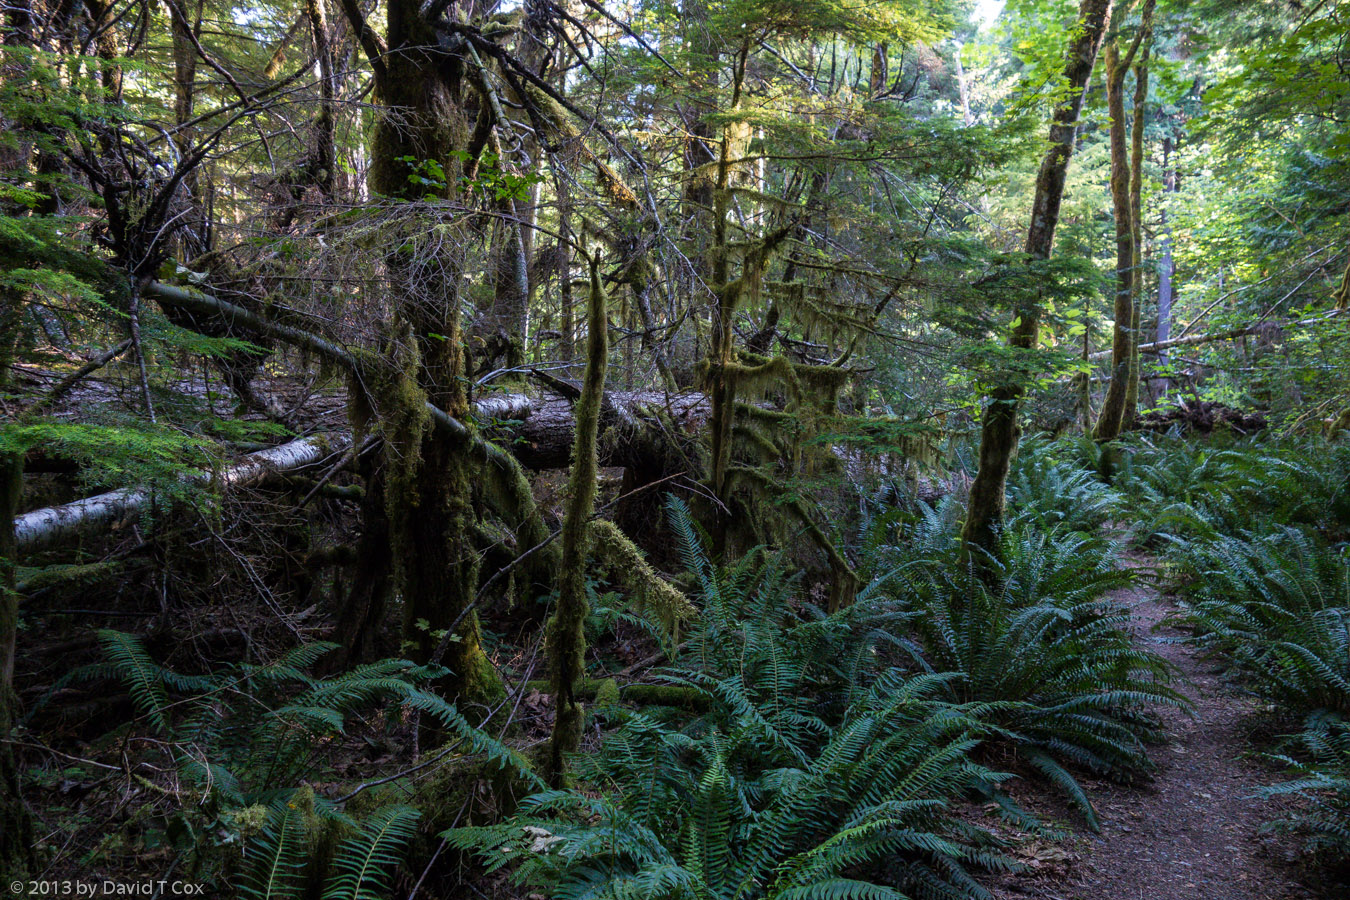 Loop Trail, Newhalem Camp, North Cascades NP, WA - Dave's Travelogues